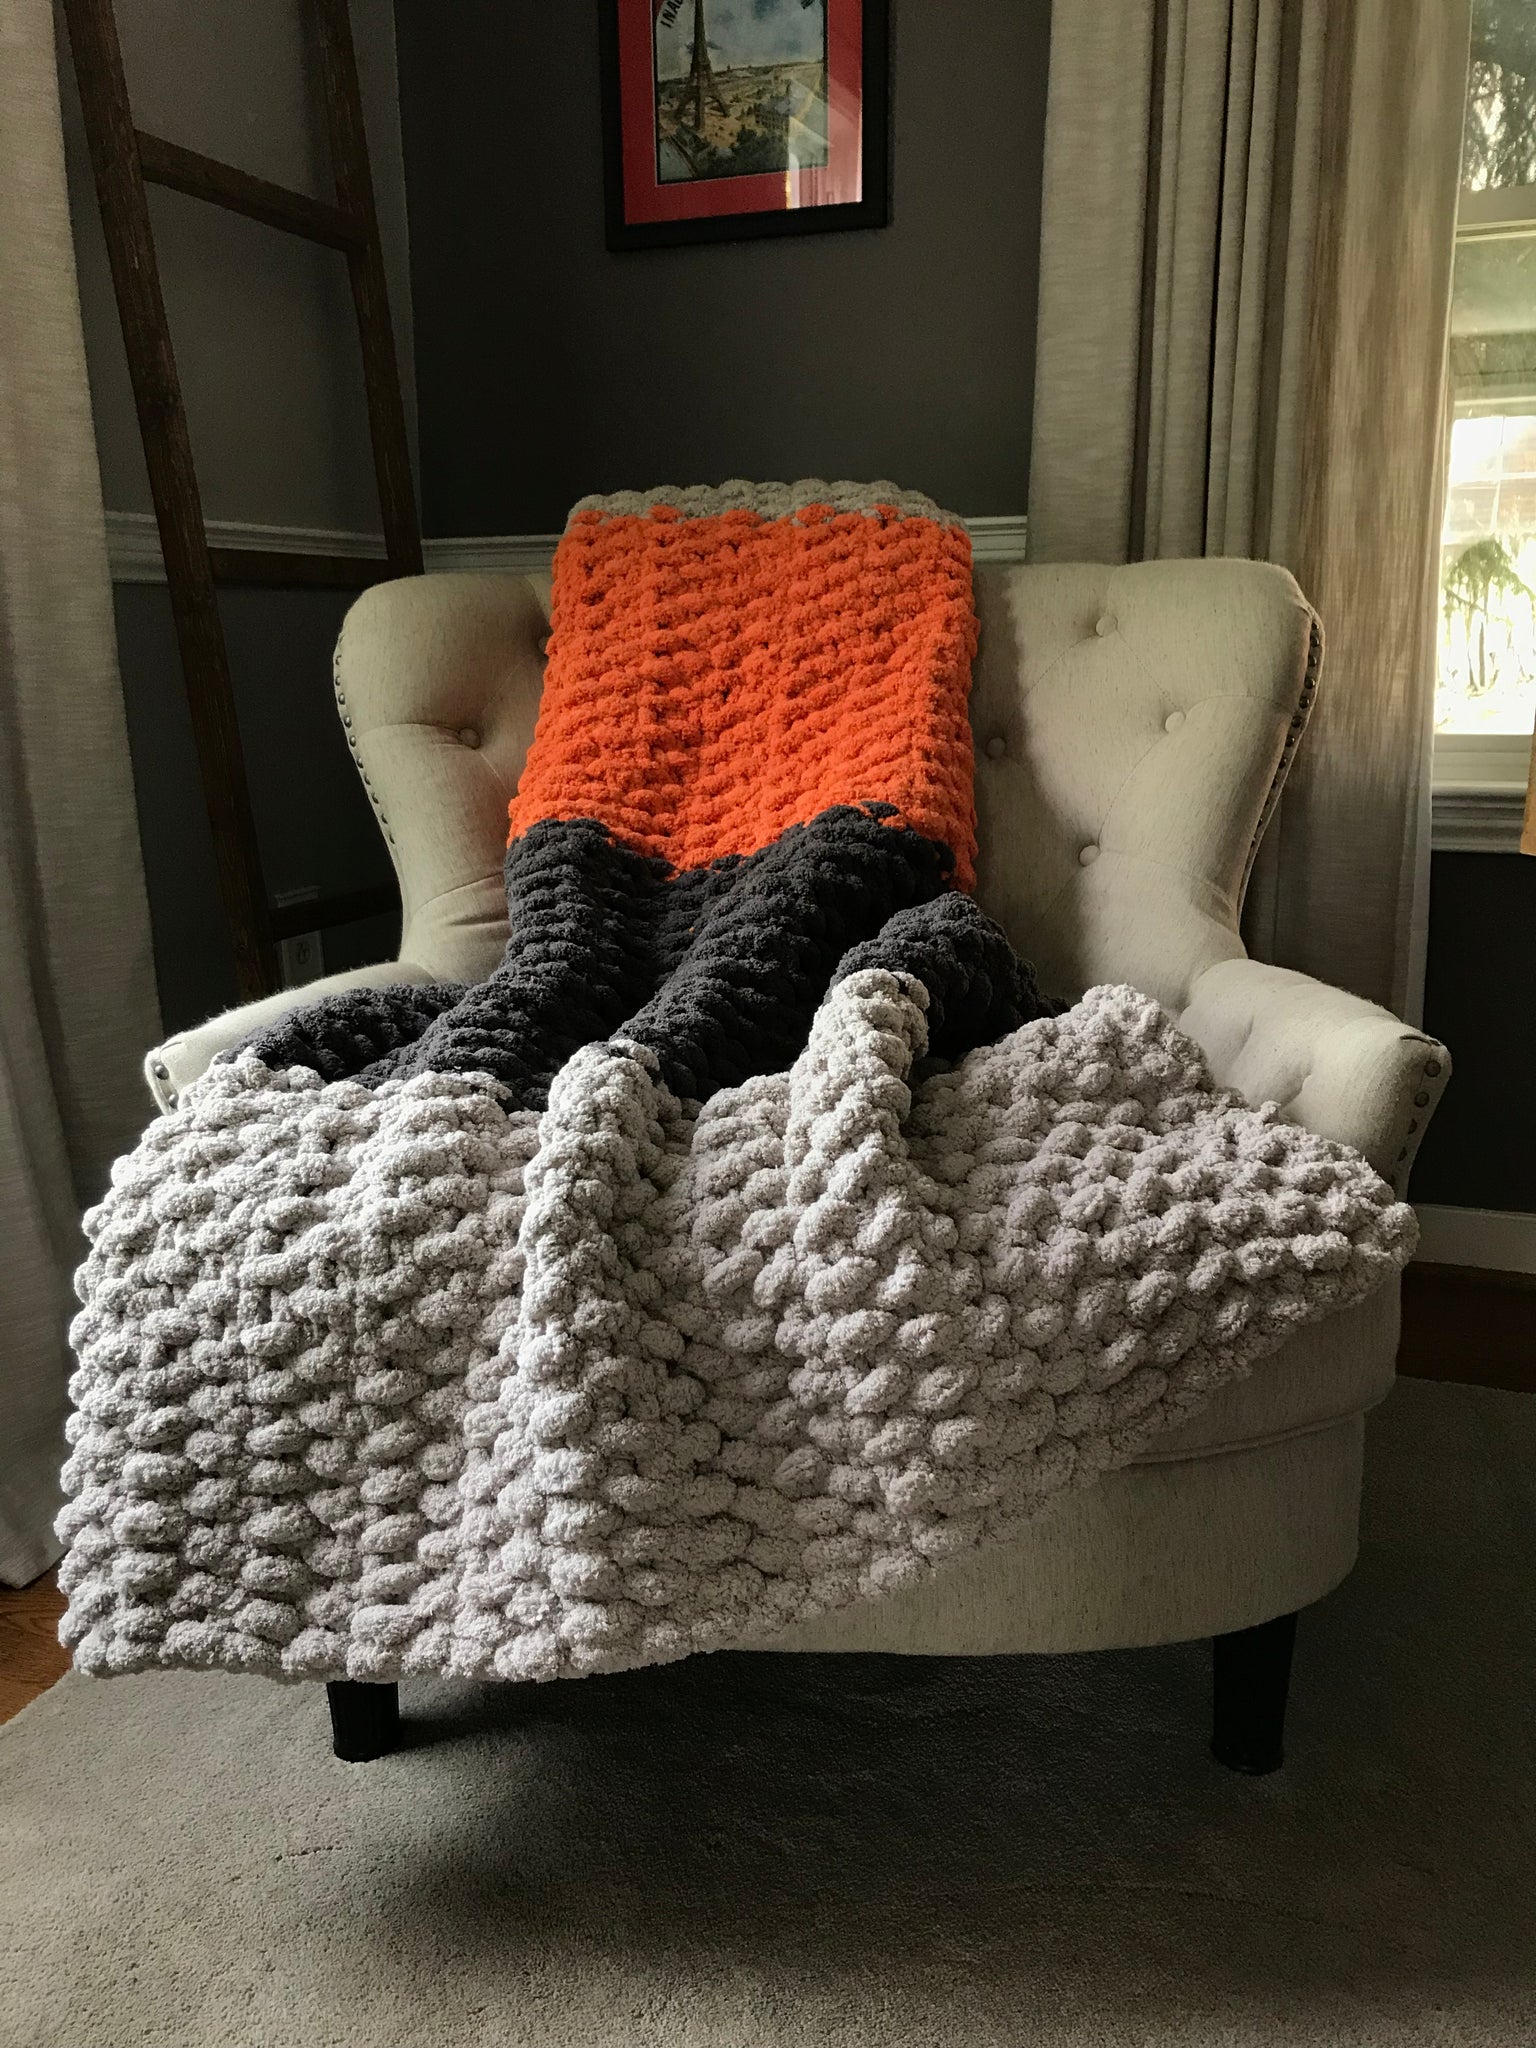 Grey Orange and Concrete Color Block Throw Blanket for Sale by sylviabosky